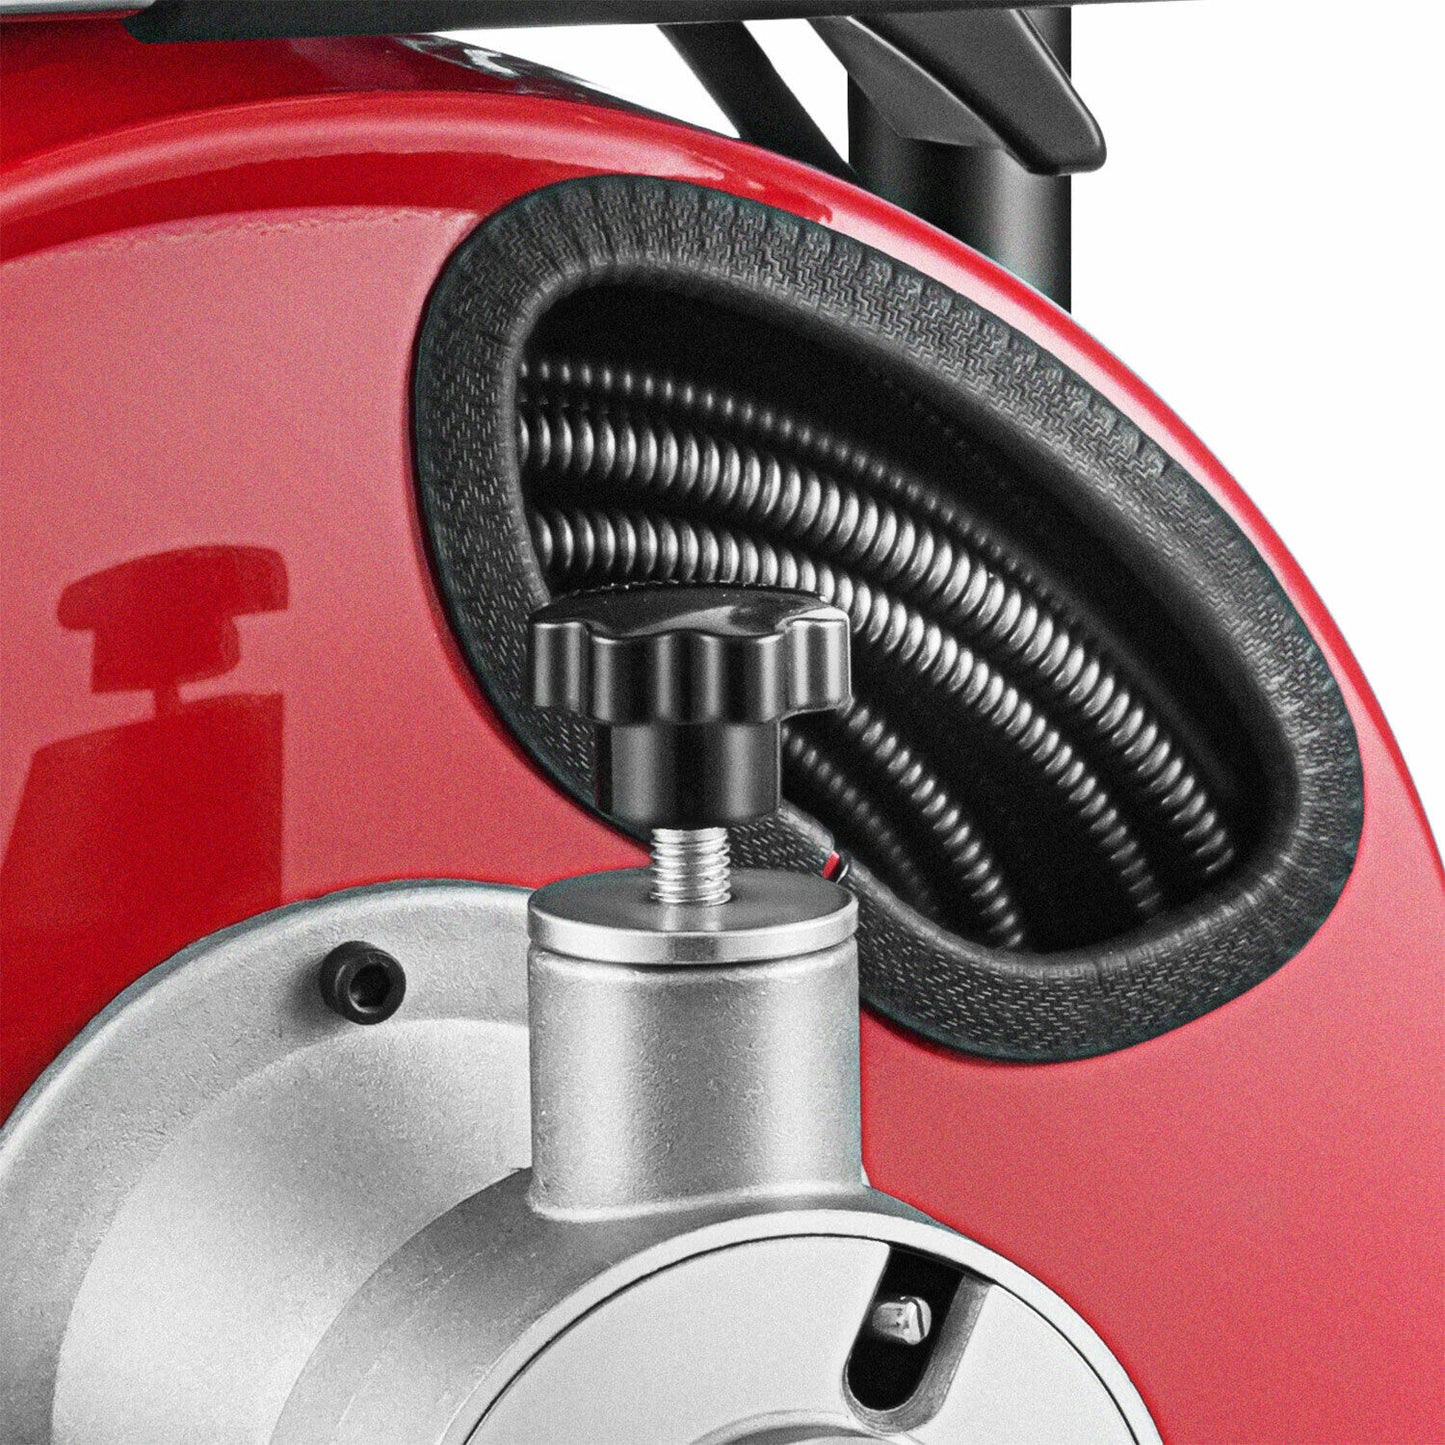 100FT Electric Sewer Snake Drain Auger Cleaner Cleaning Machine w/Cutters,Gloves